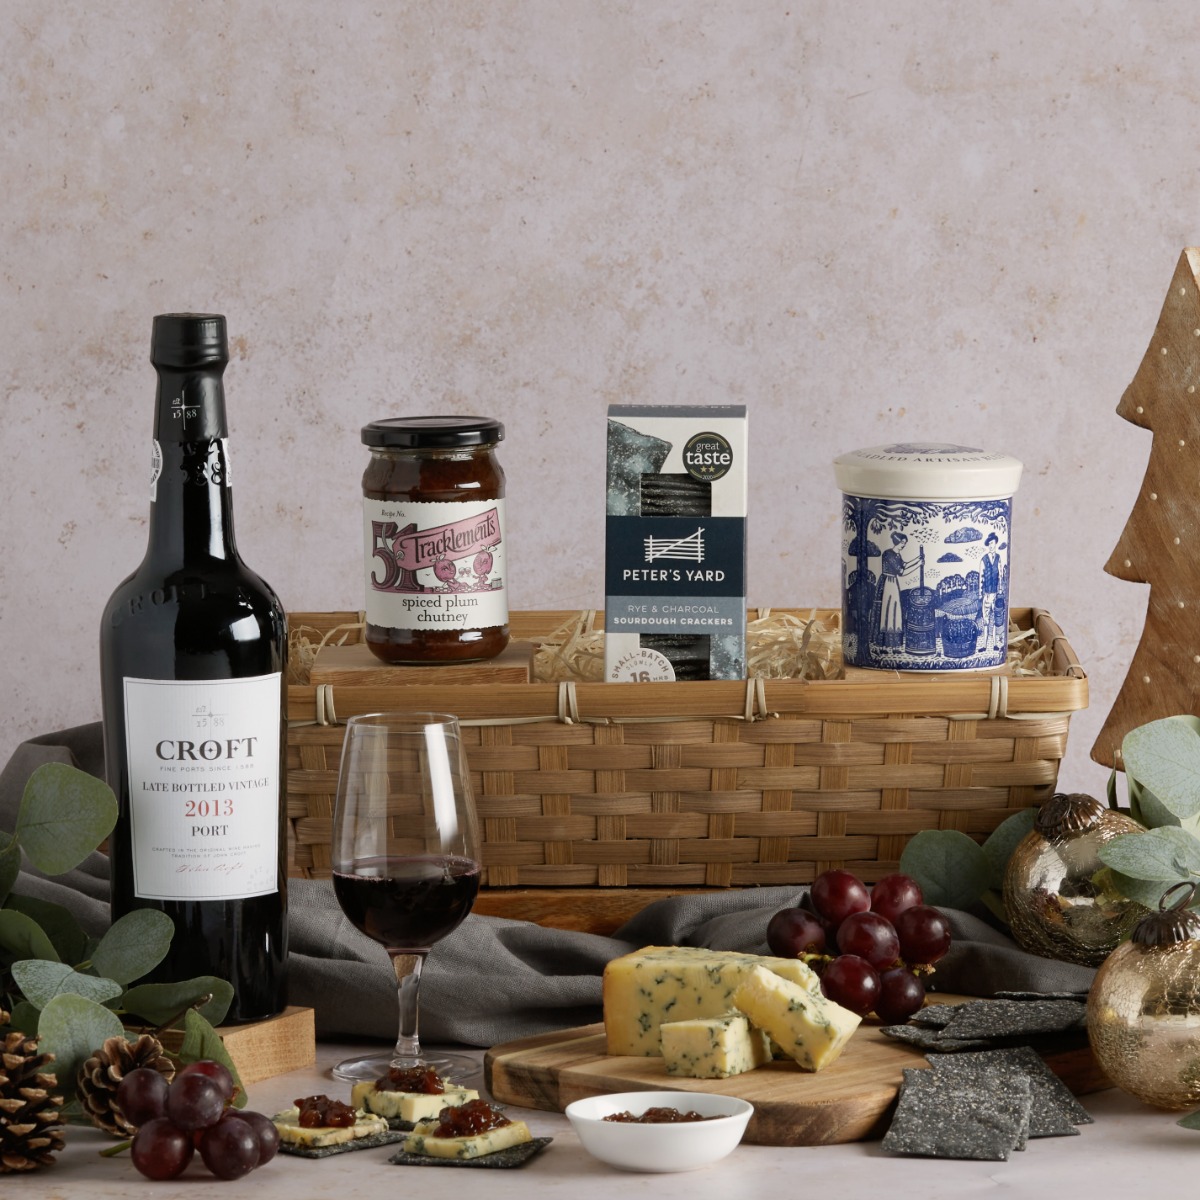 The Luxury Port and Stilton Hamper with content on display including Christmas decor